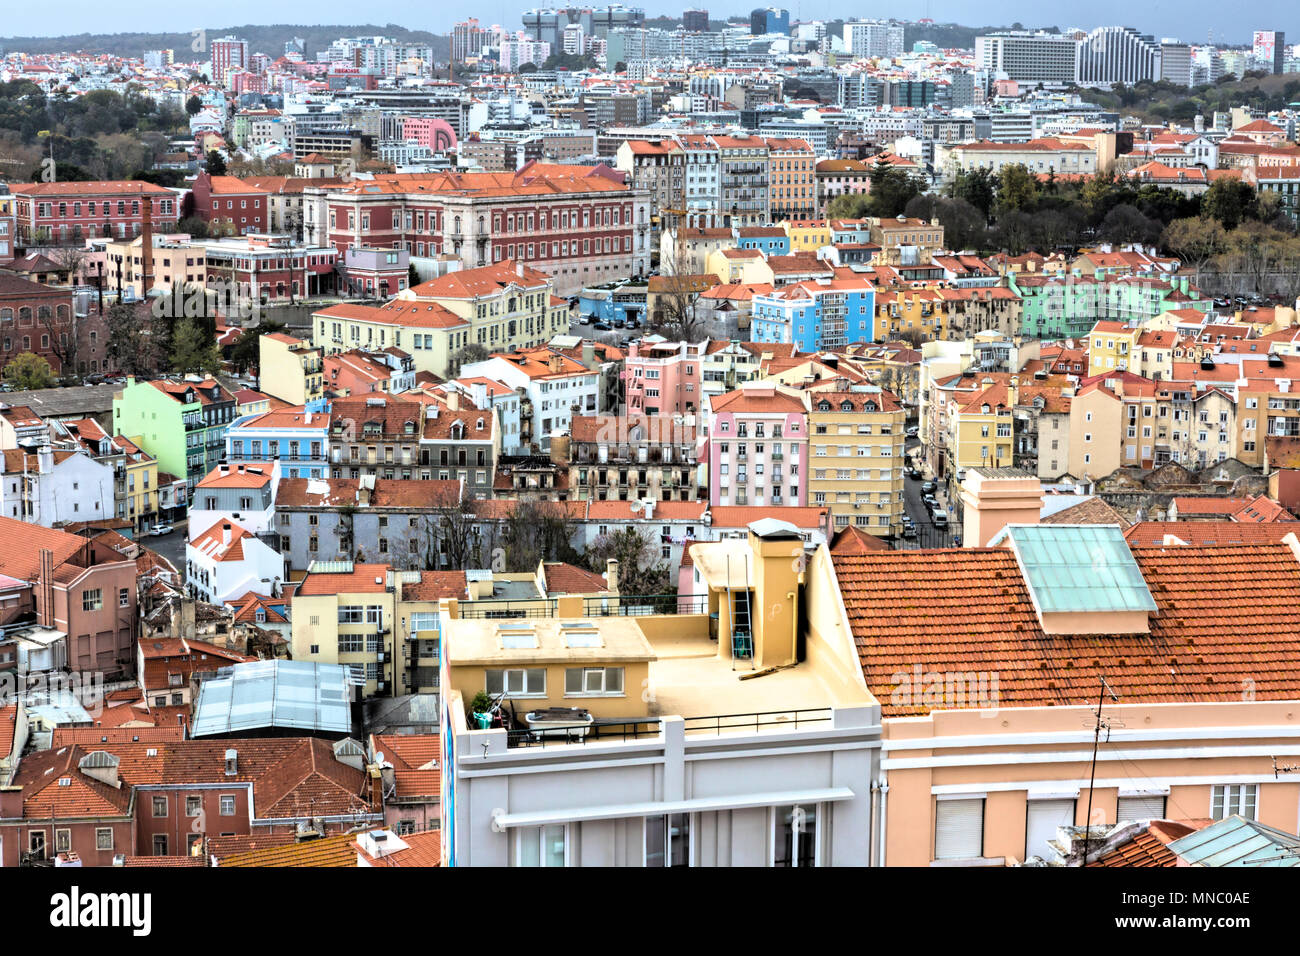 View across the roofs and buildings of Lisbon Stock Photo